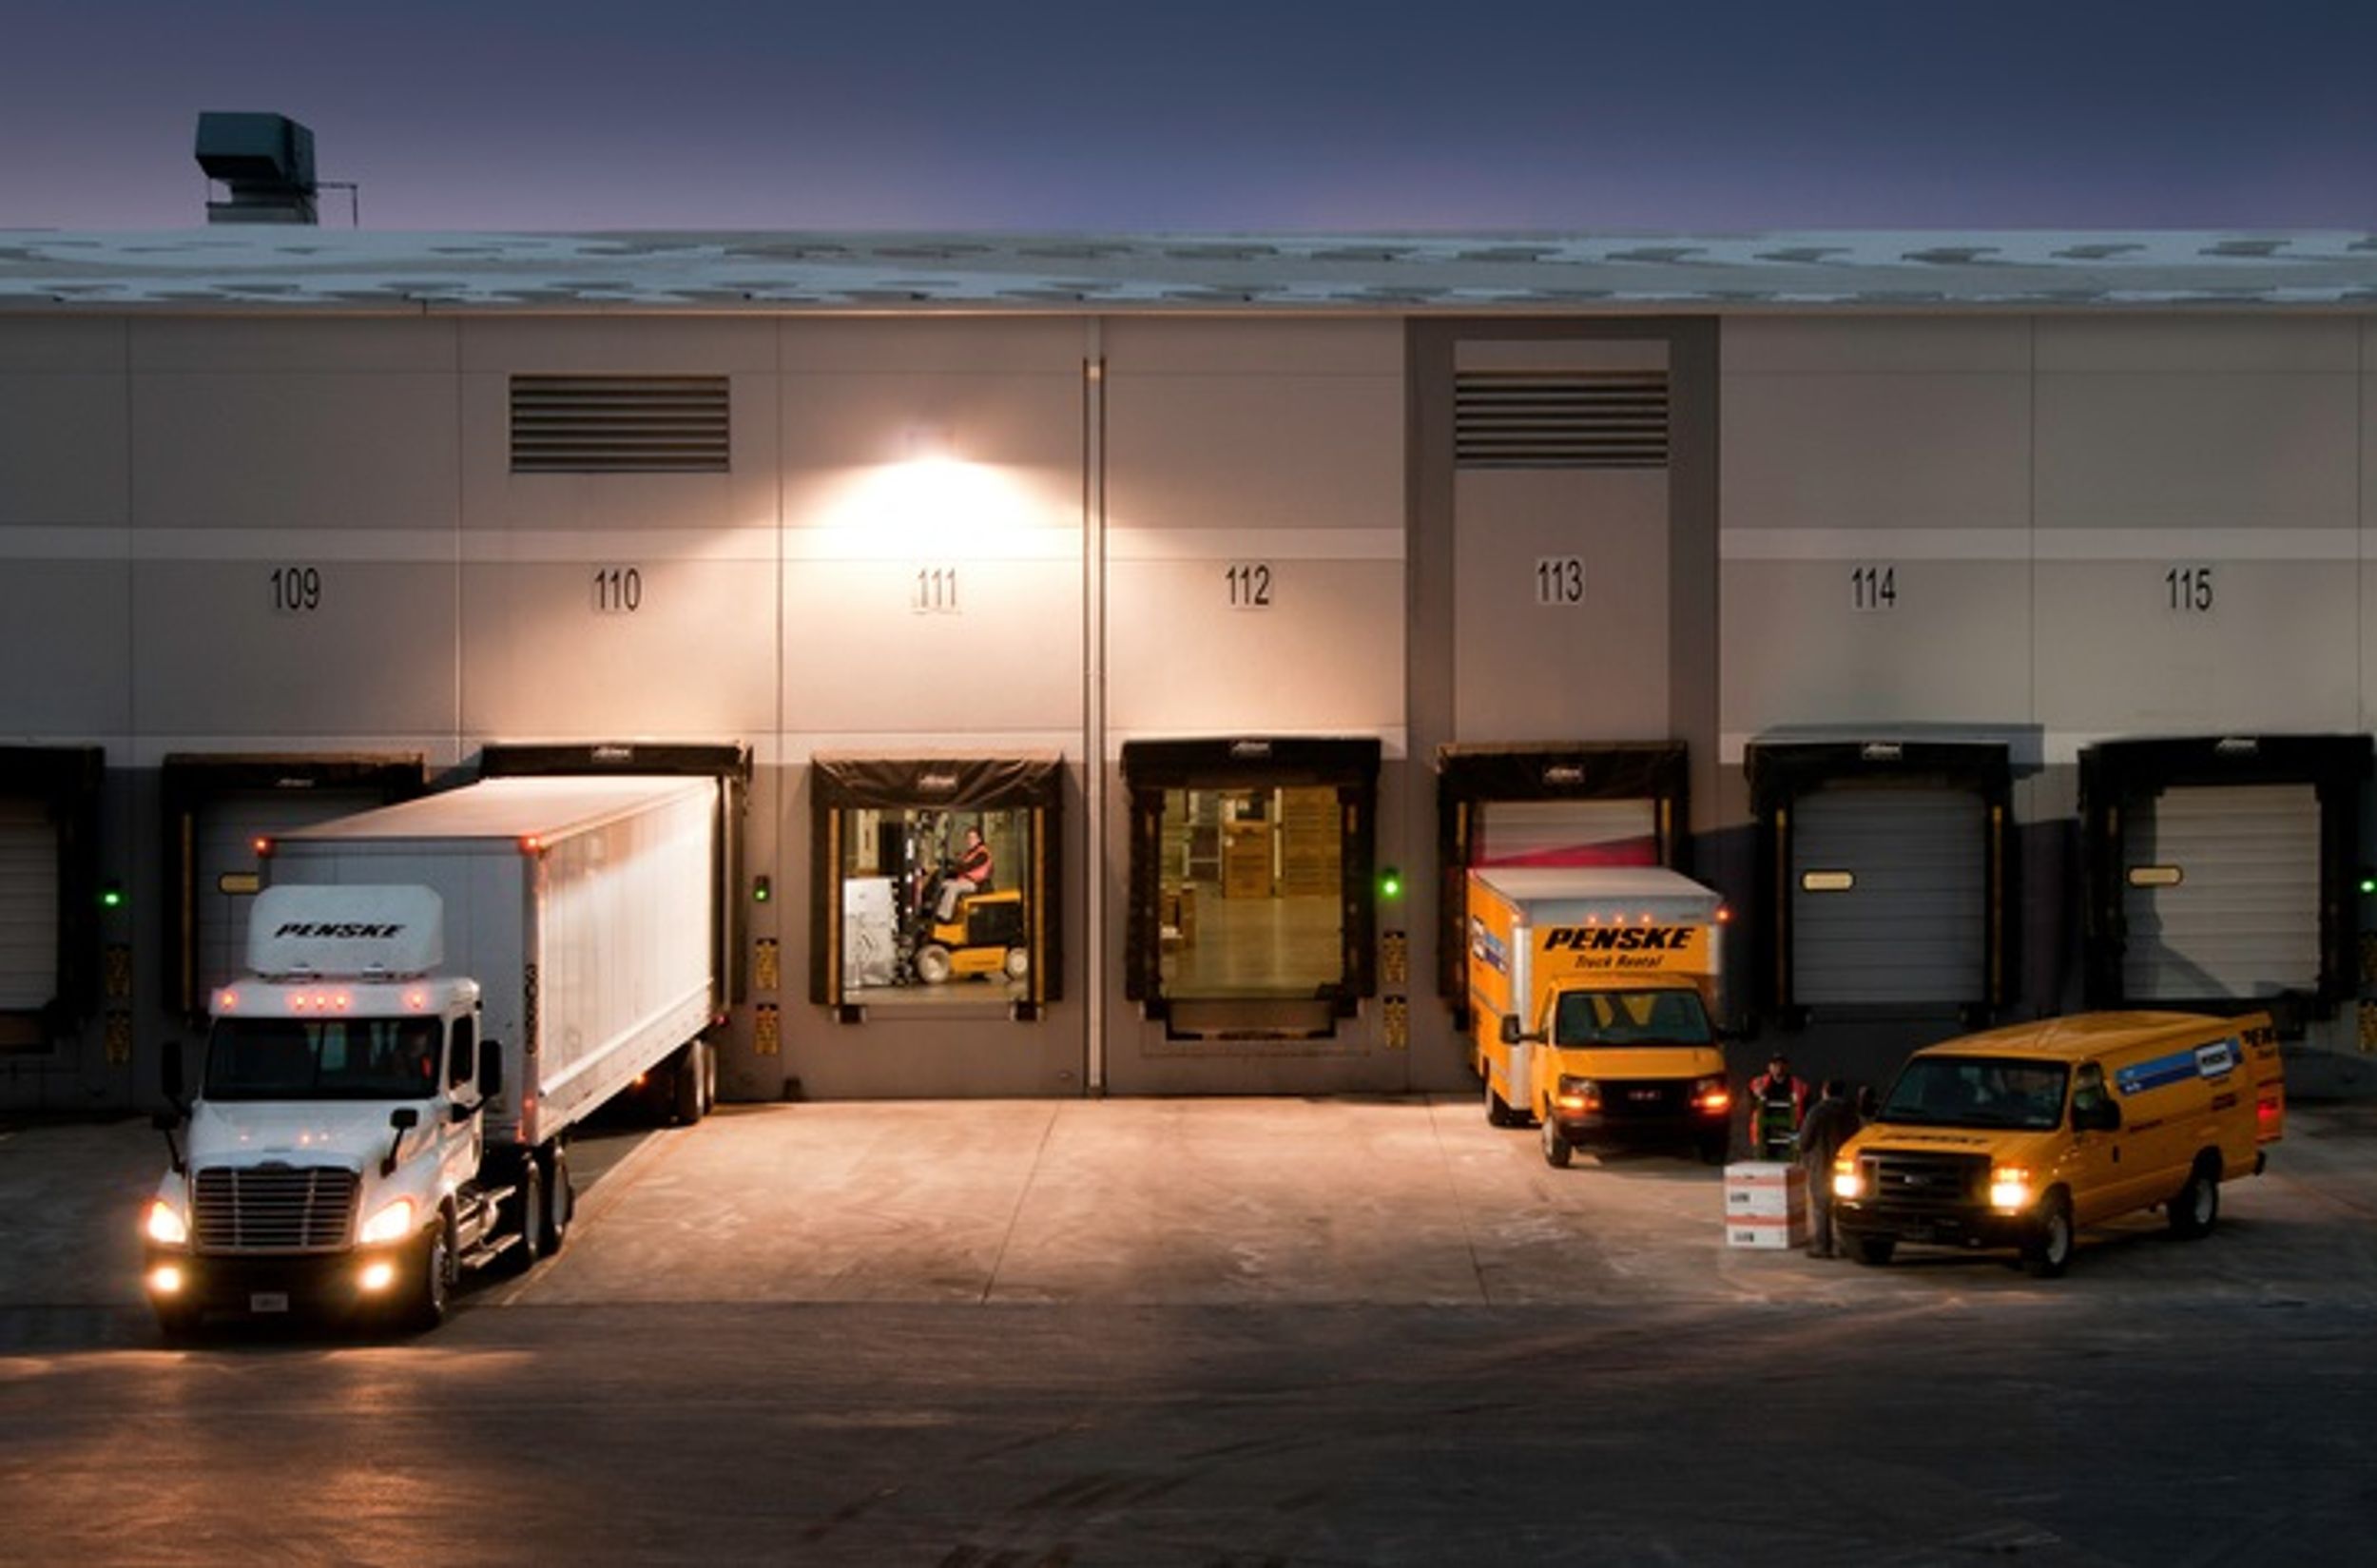 Penske Logistics Warehousing Solutions Receives Fifth Quest for Quality Award